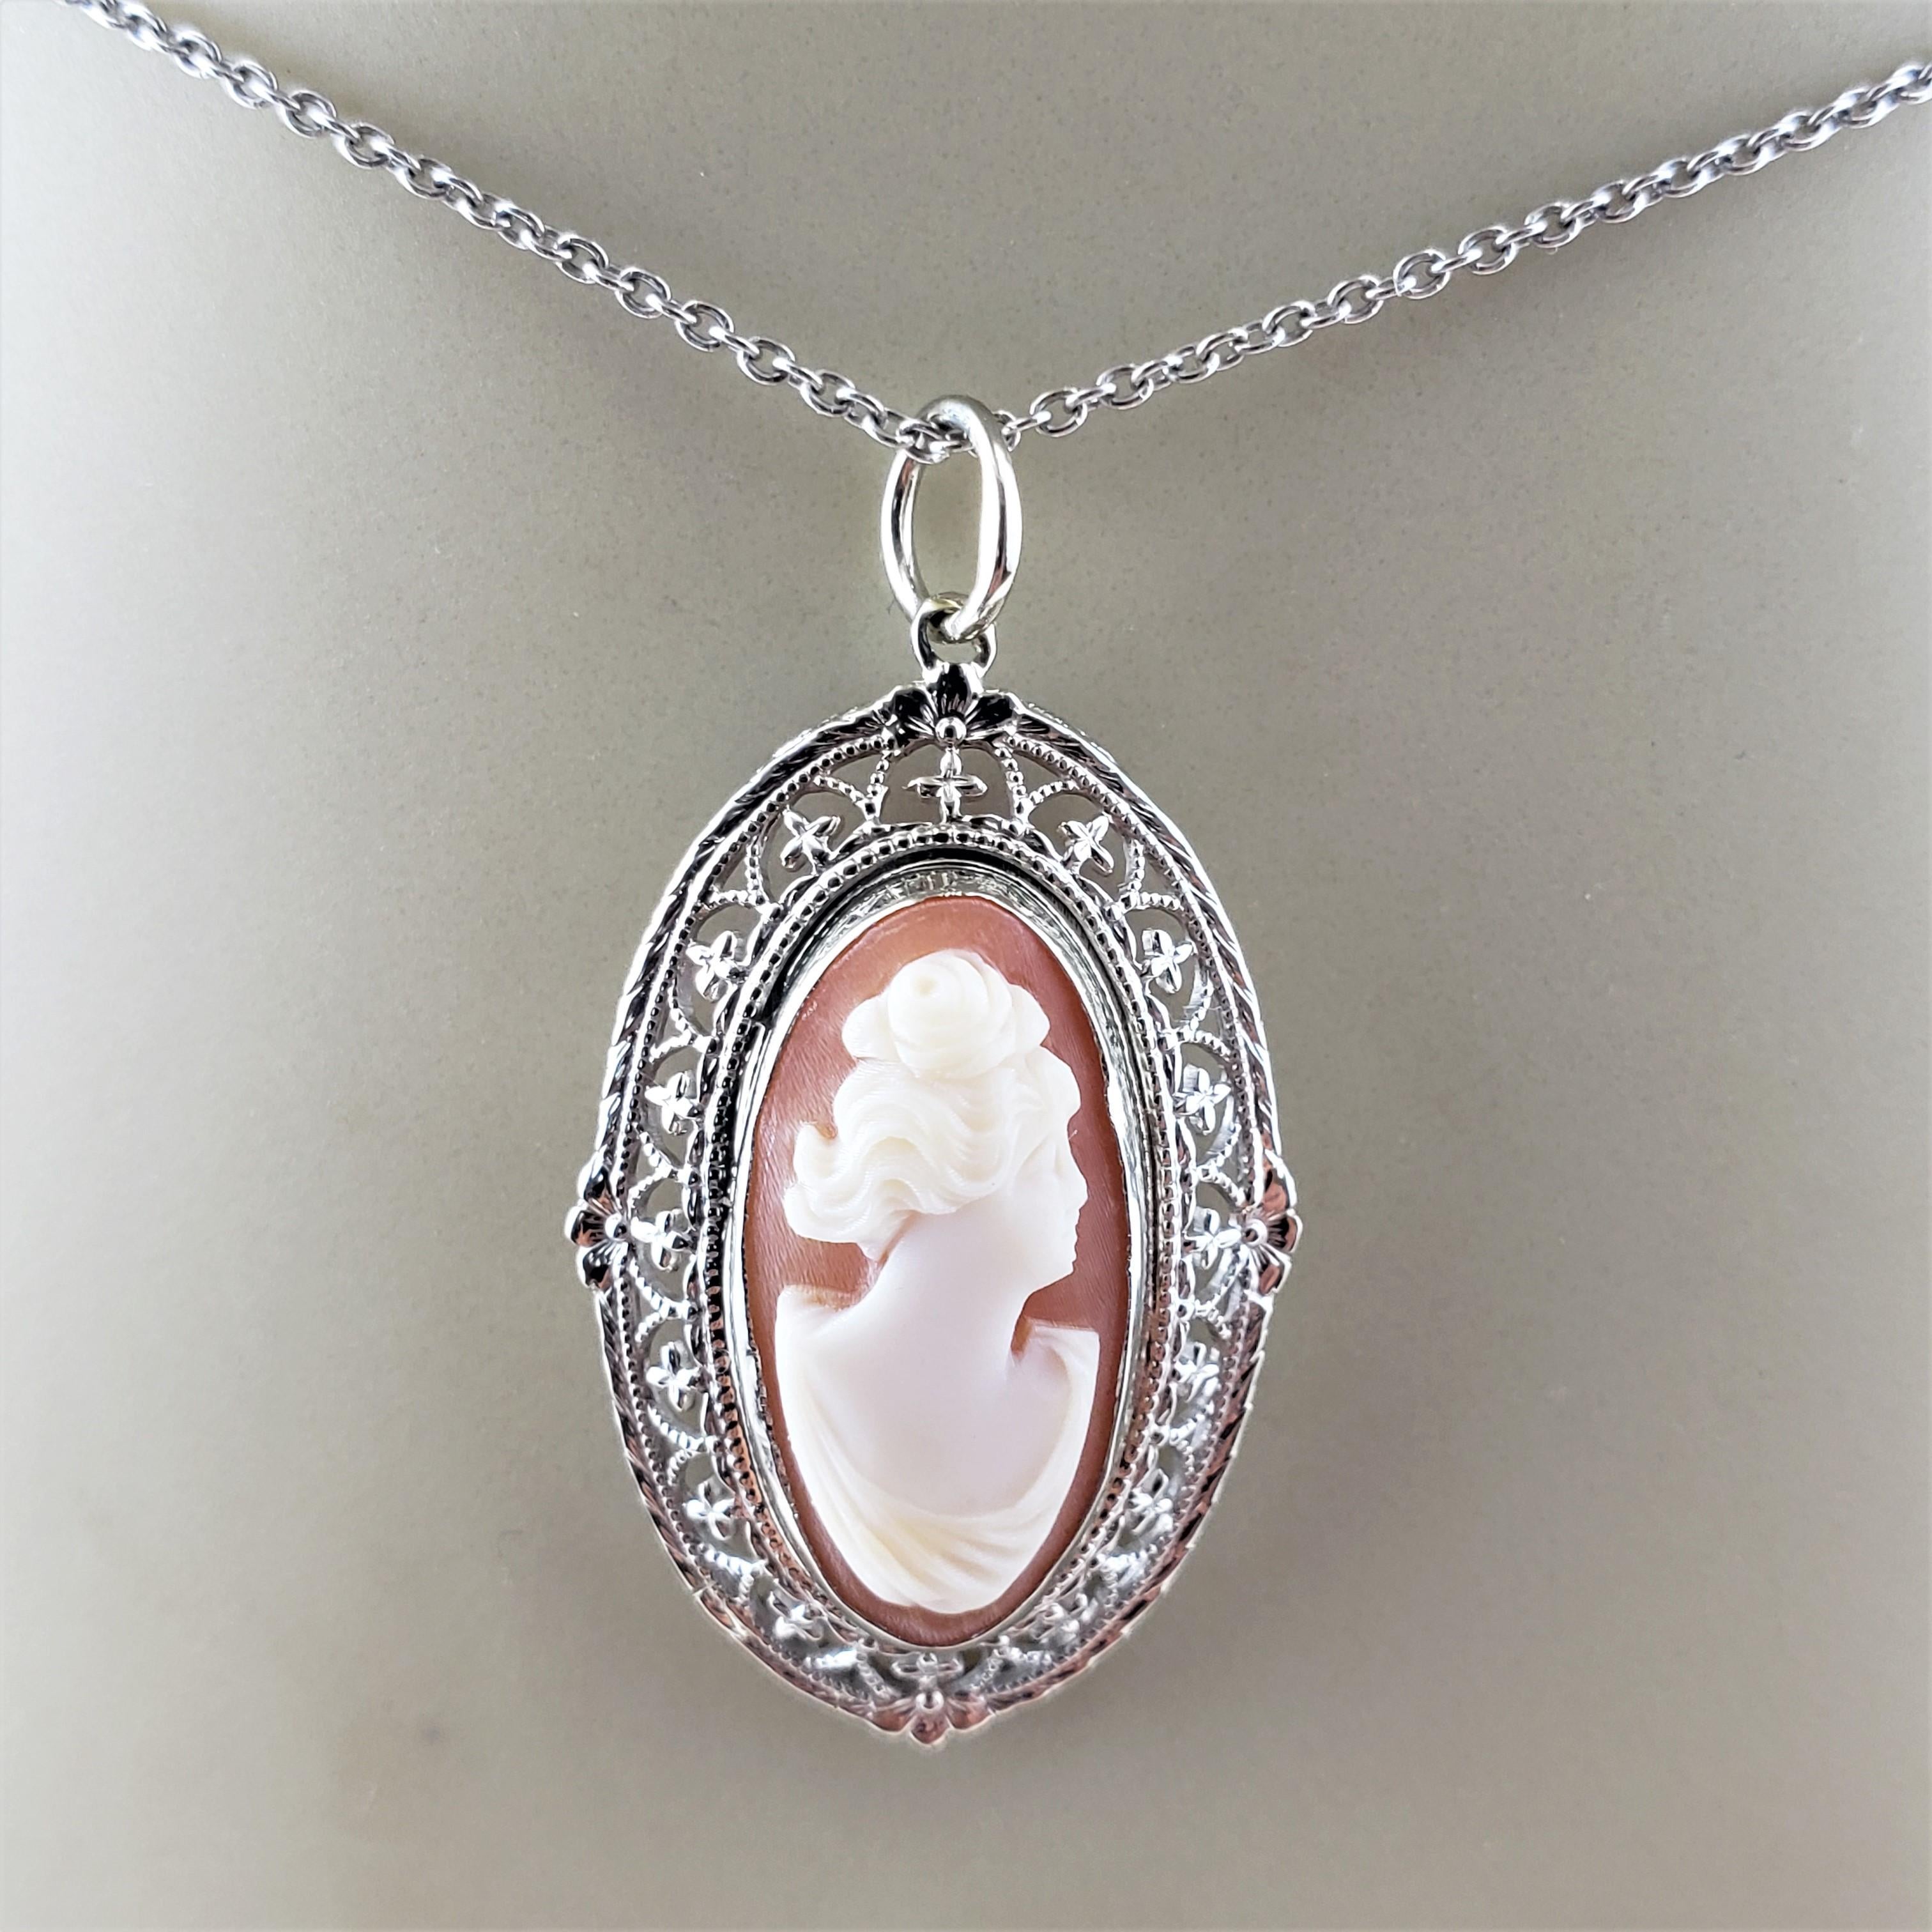 14 Karat White Gold Cameo Pendant-

This elegant cameo features a lovely lady in profile framed in beautifully detailed 14K white gold filigree.

*Chain not included

Size:  28 mm x 17 mm

Weight:  1.5 dwt. /  2.4 gr.

Acid tested for 14K